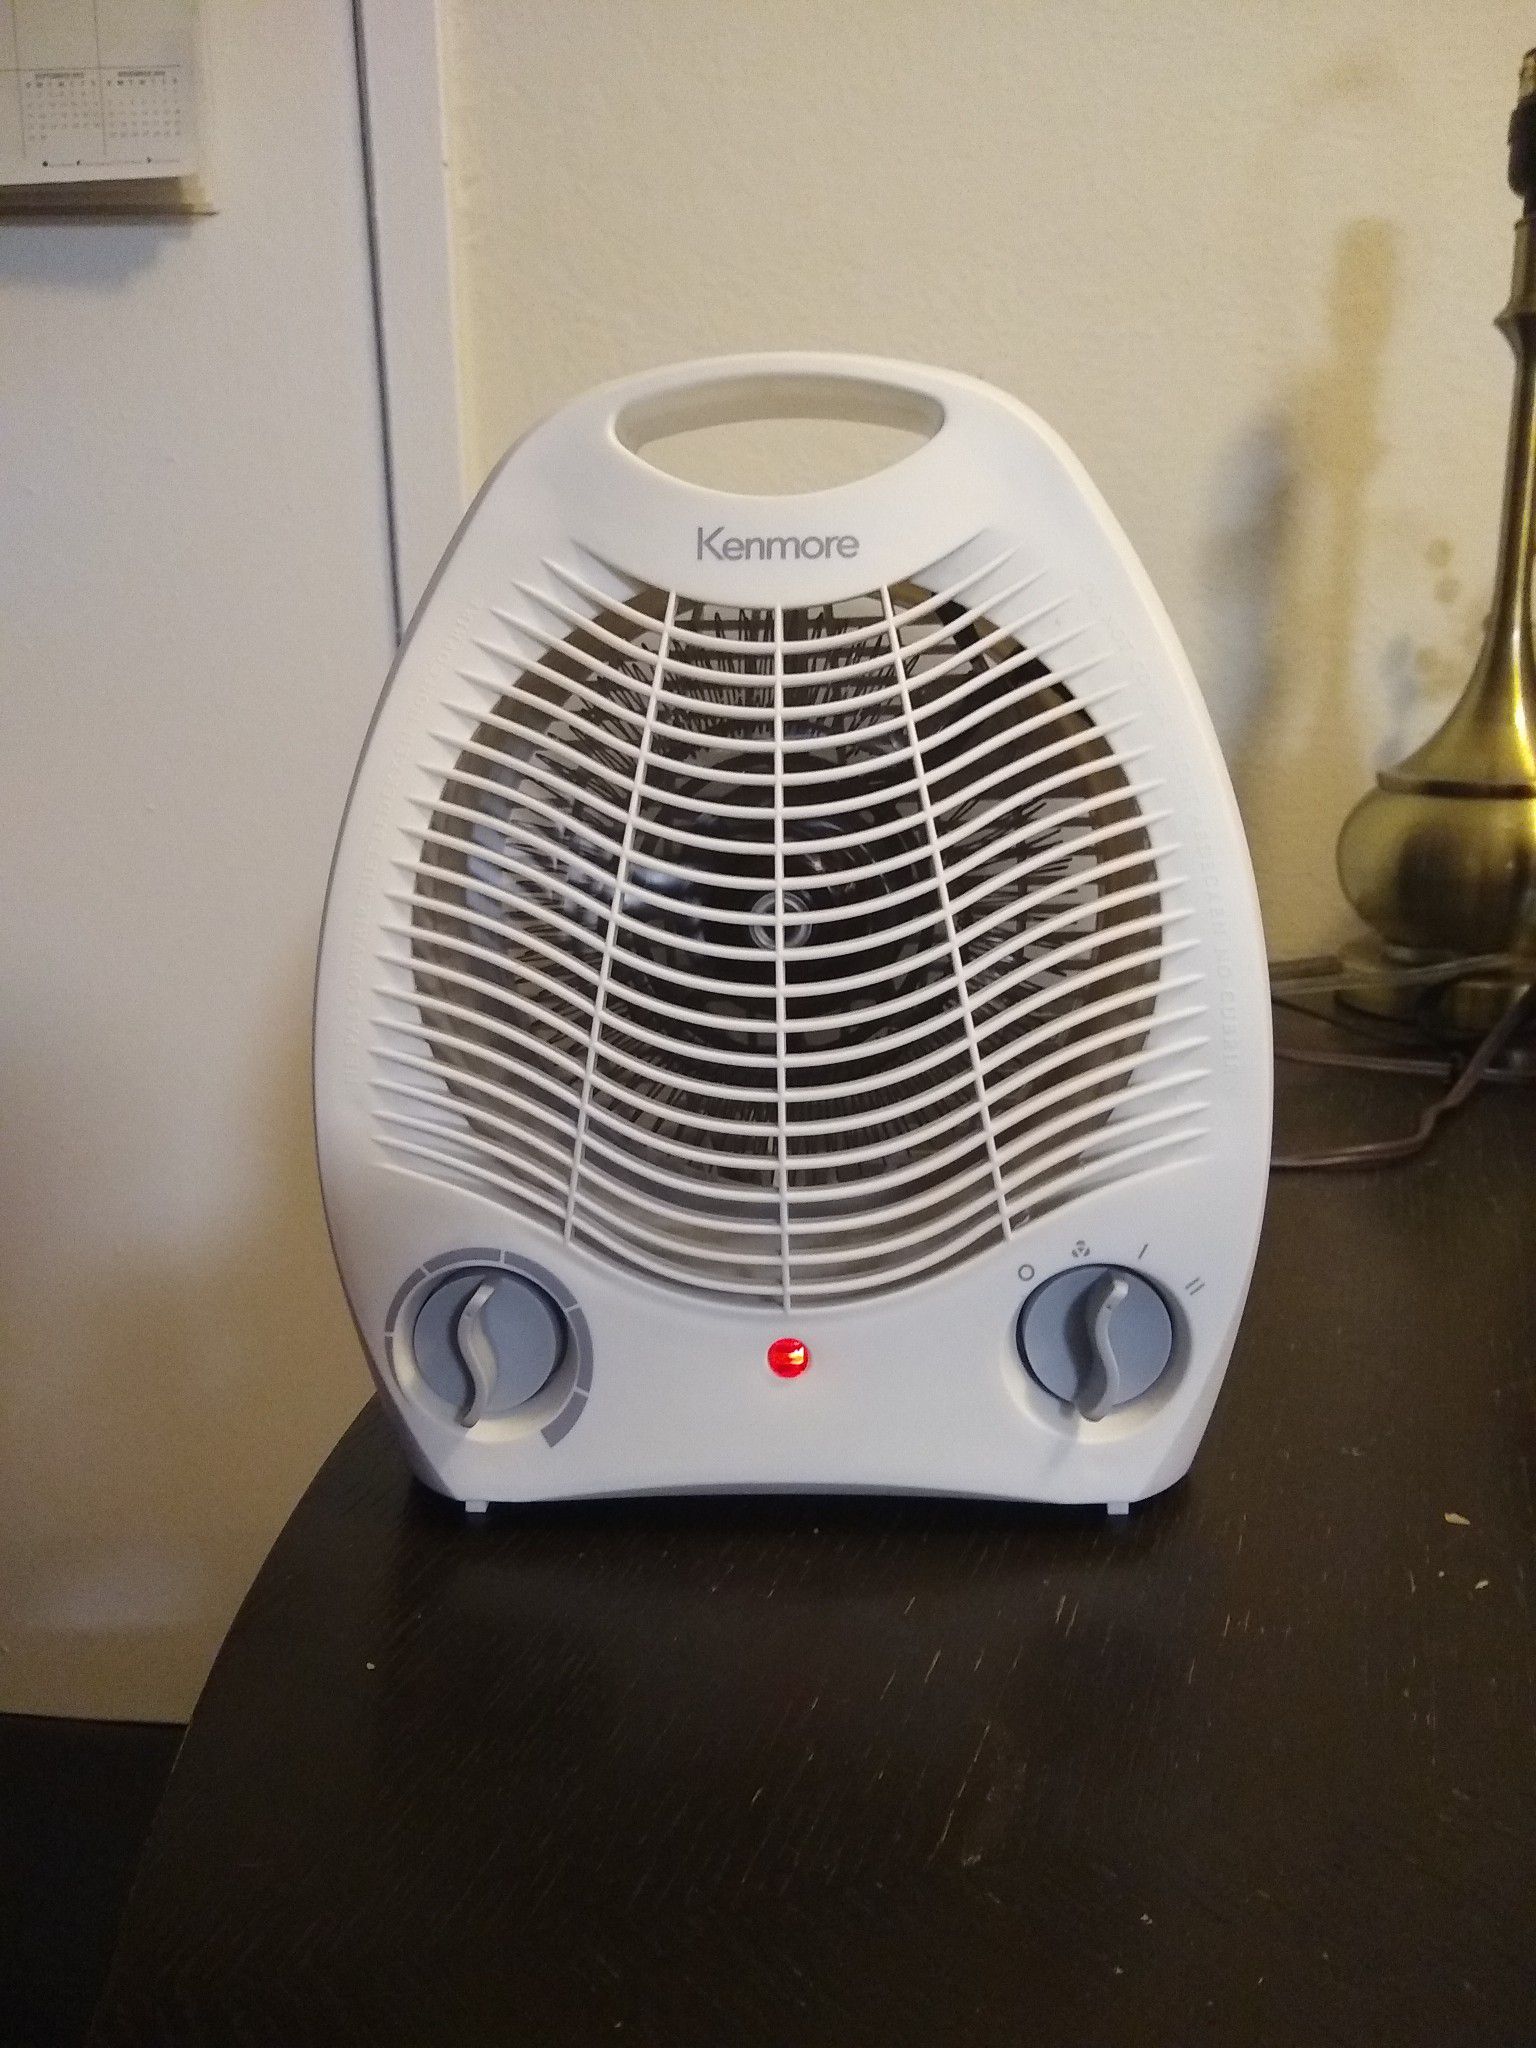 Kenmore personal space heater